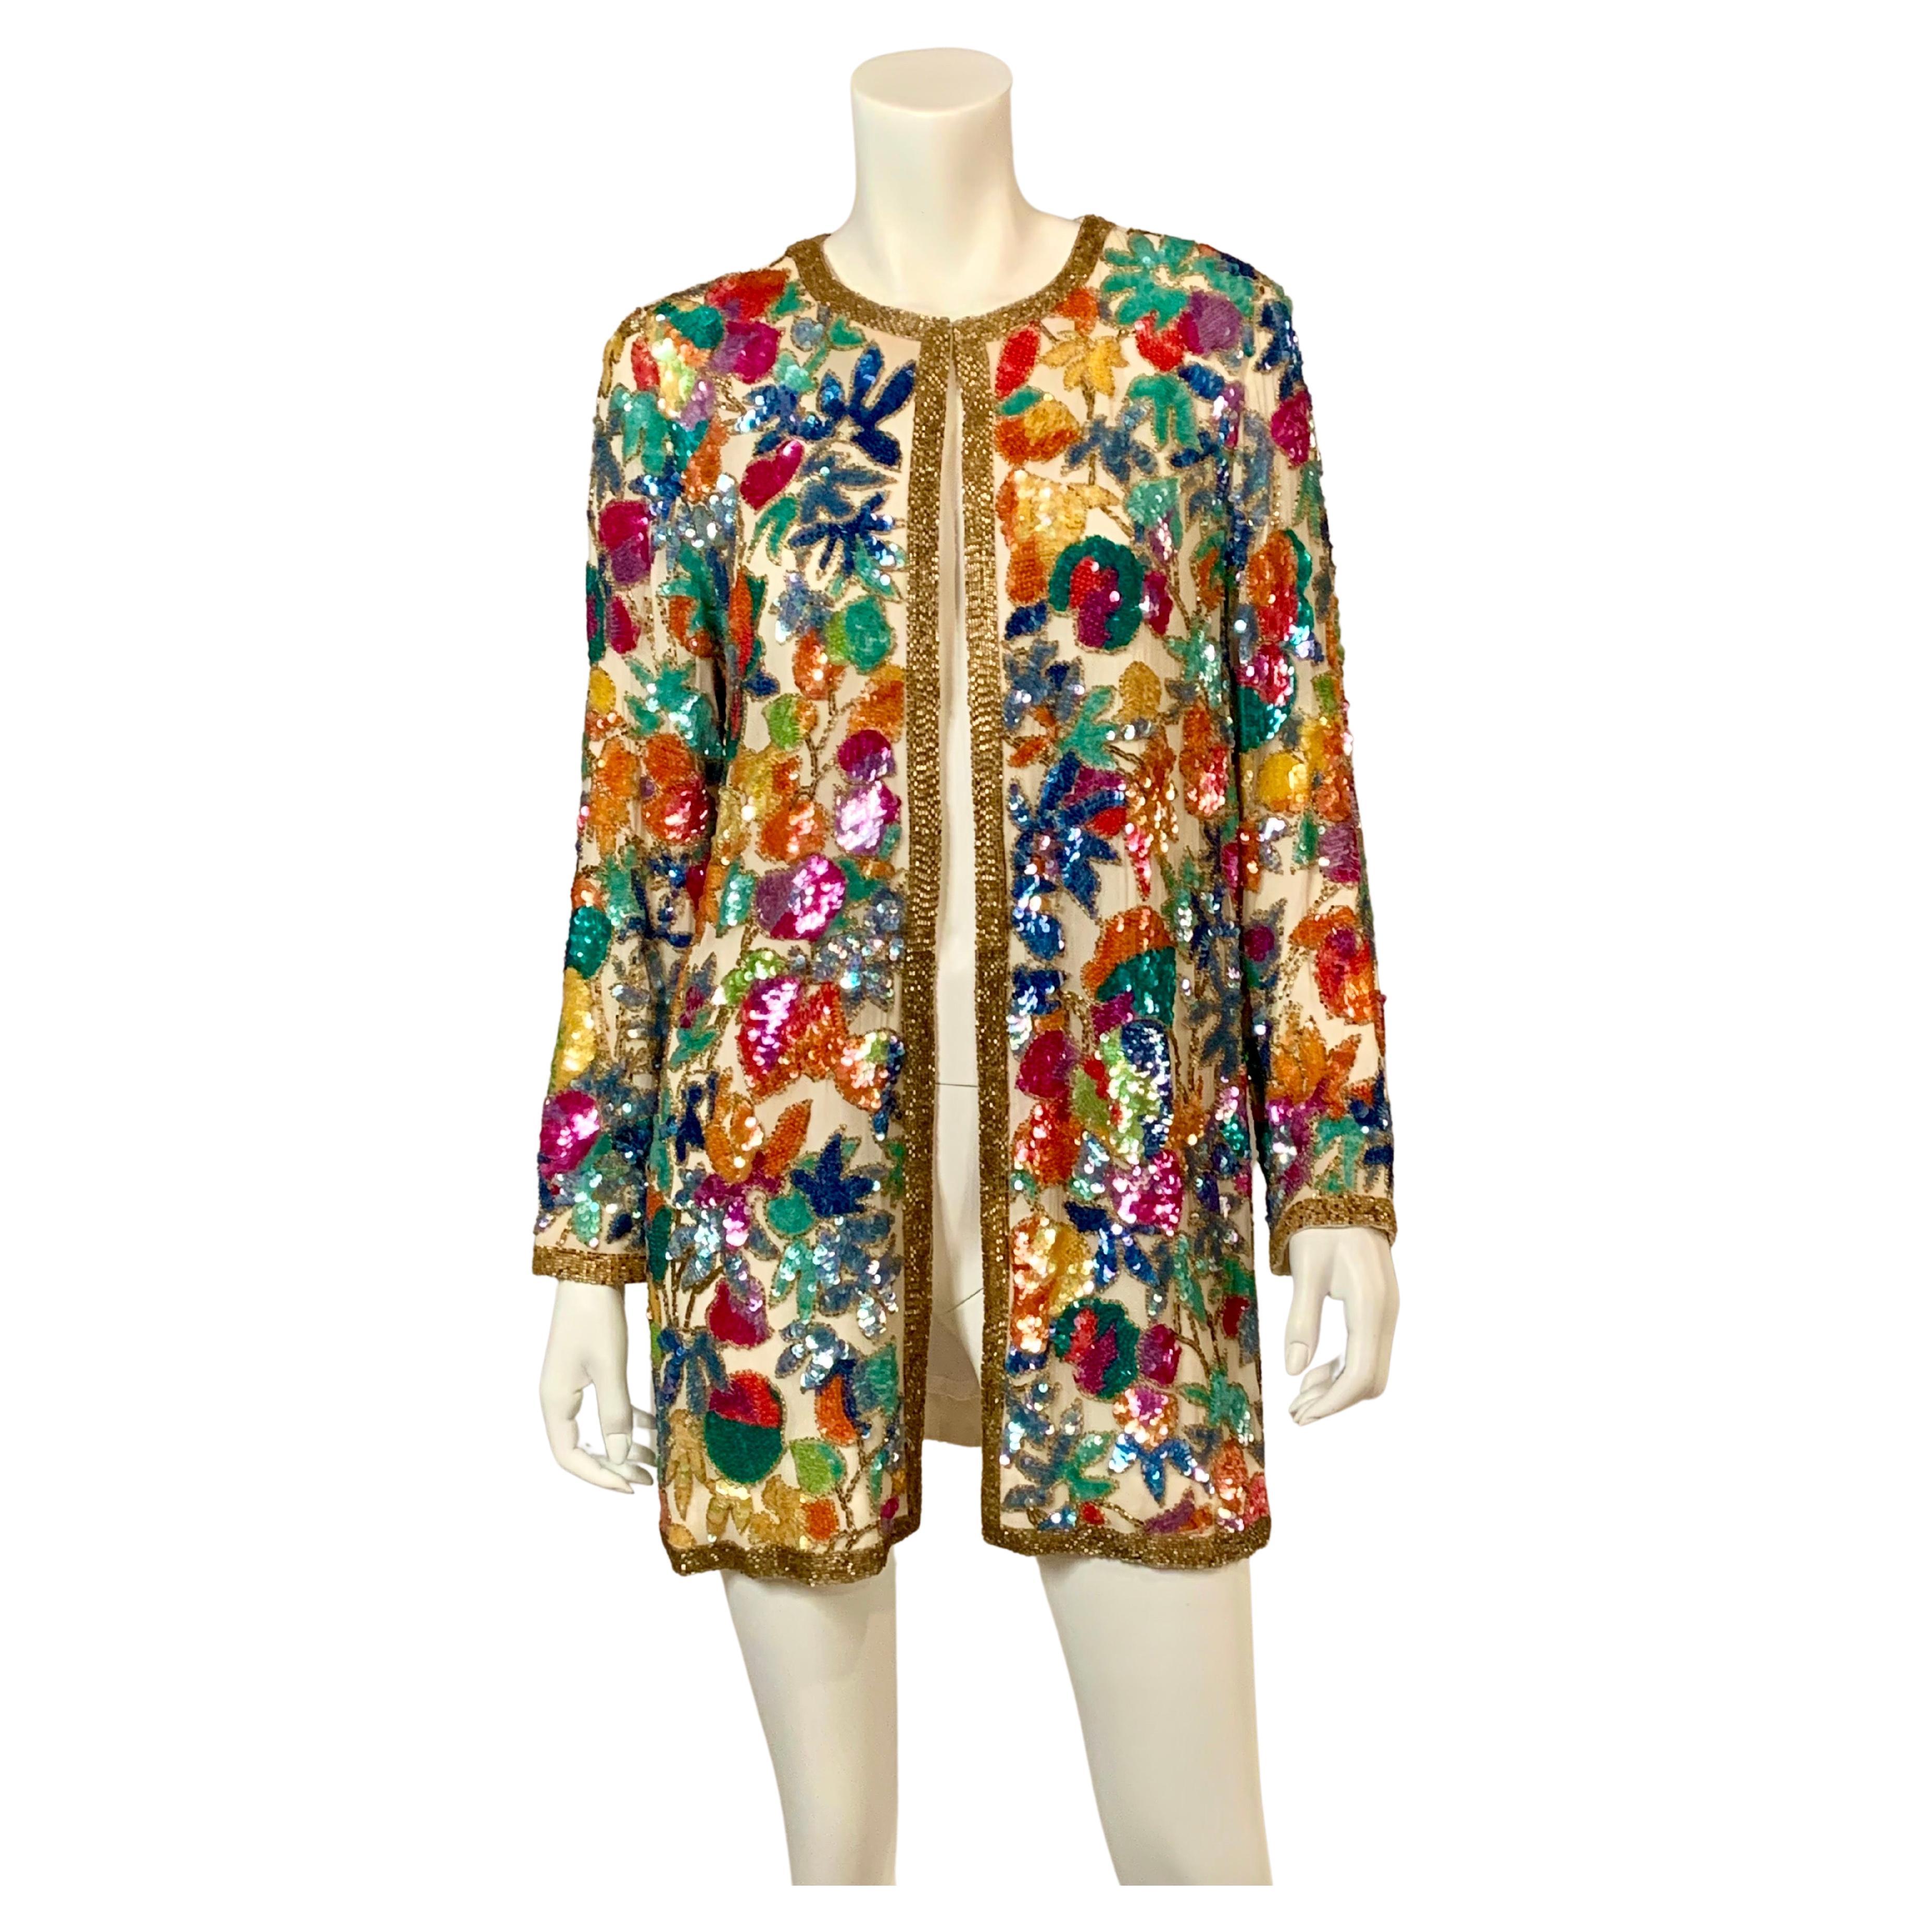 Oleg Cassini Beaded Jacket with a Multi Color Floral Pattern For Sale